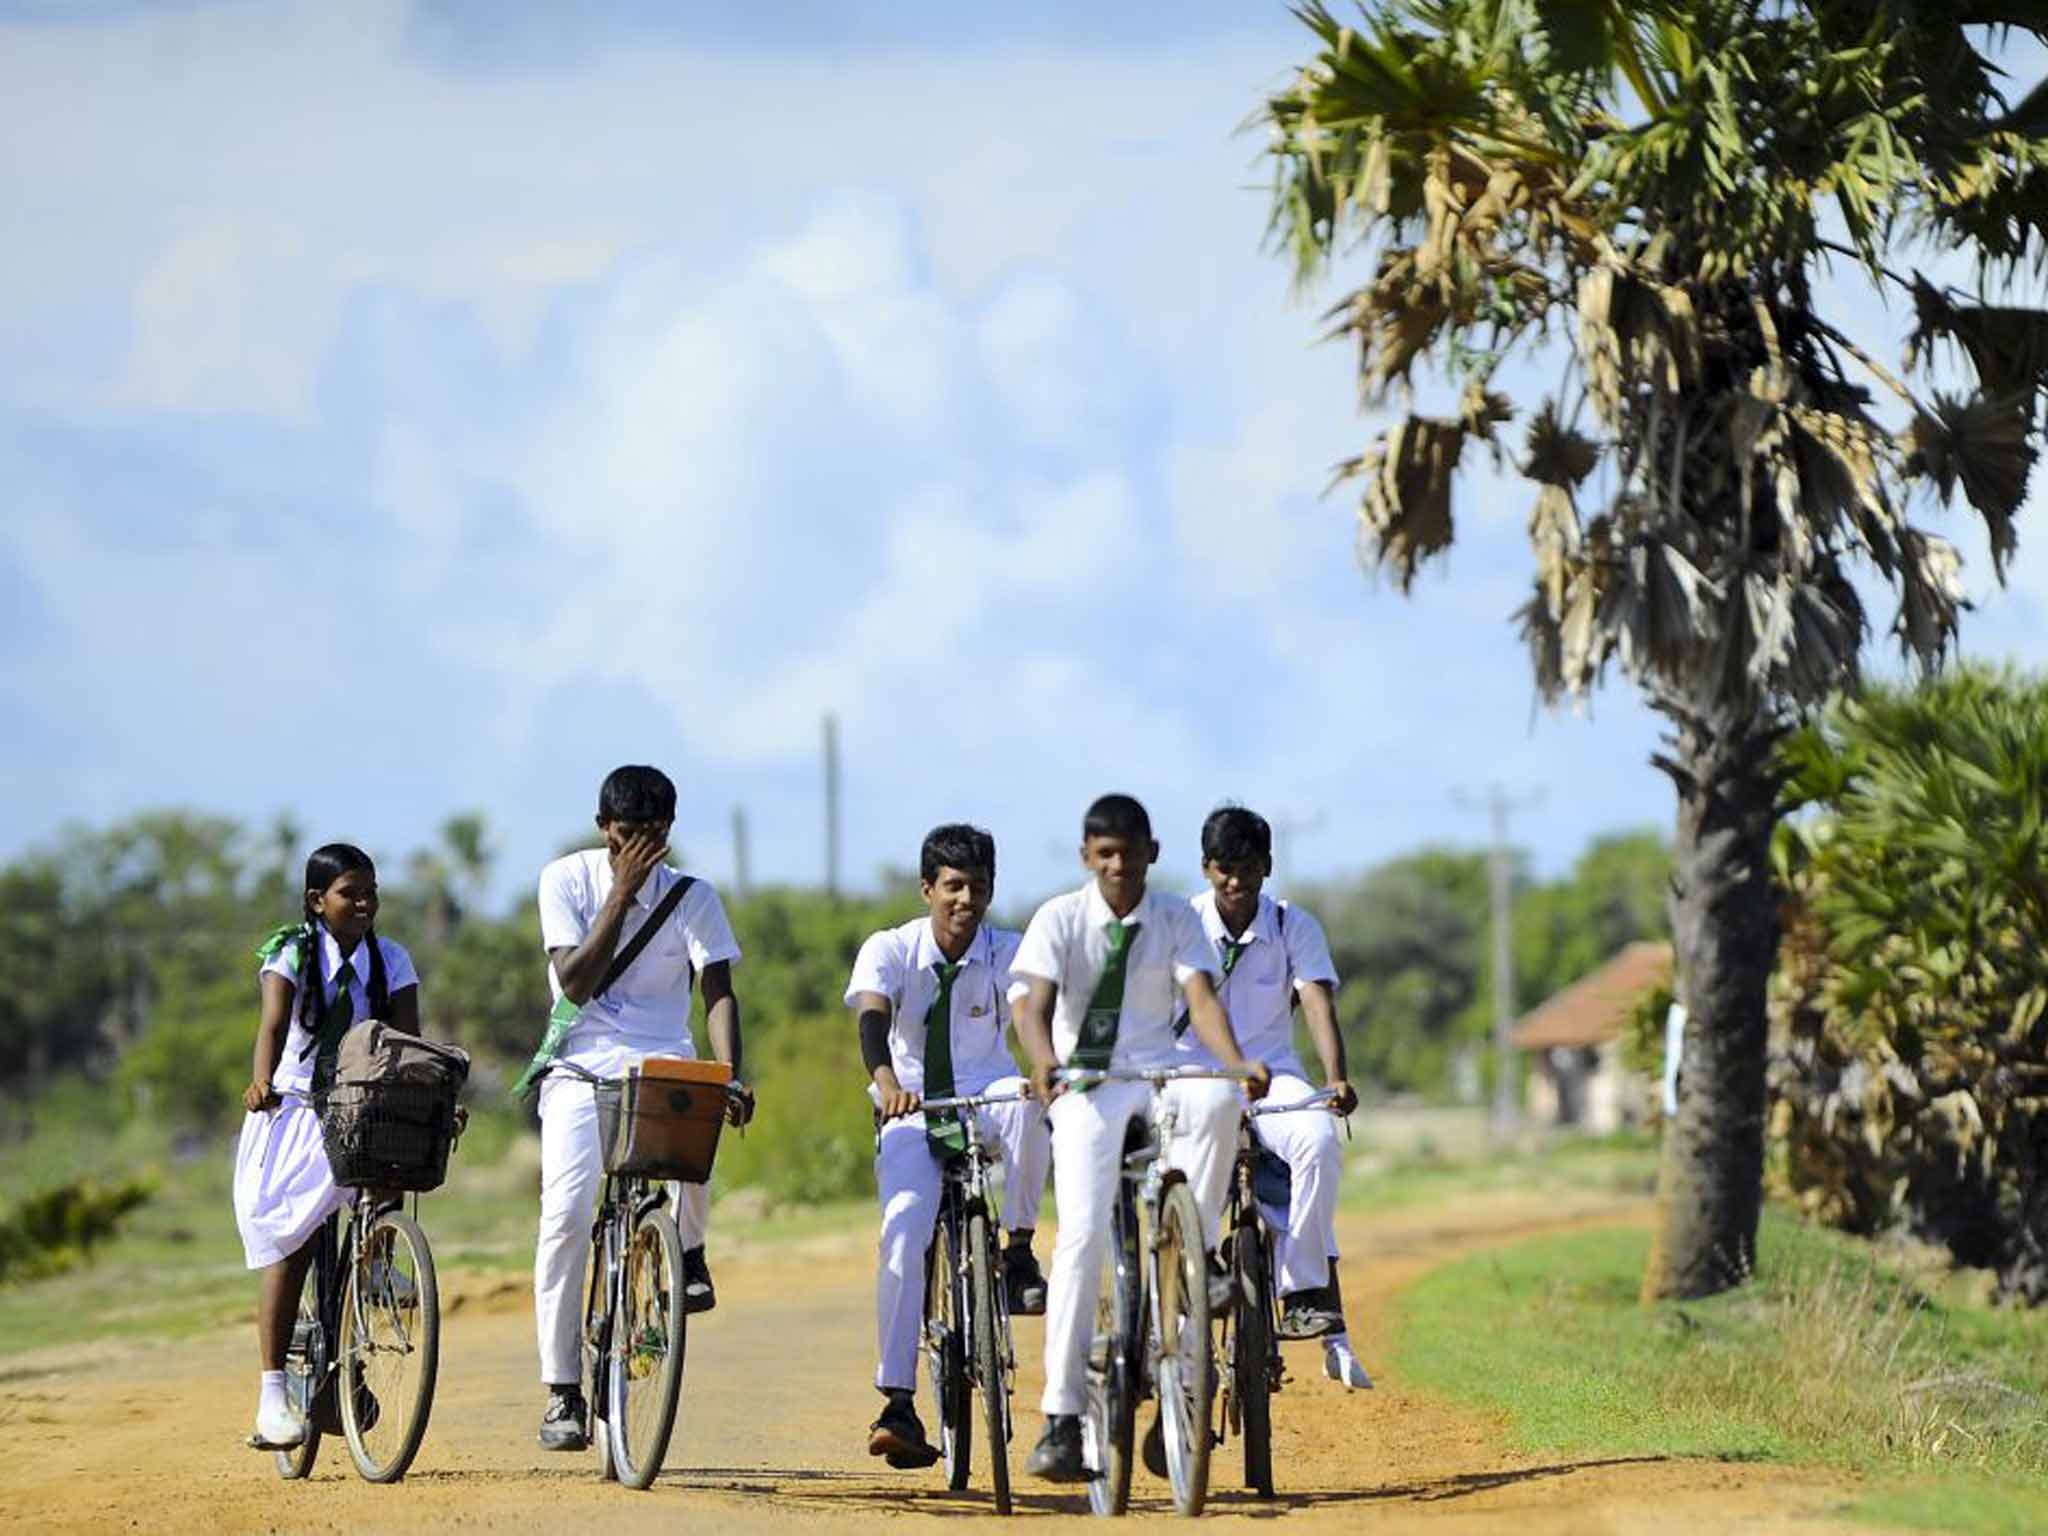 The Foreign Office has announced that overseas visitors to the northern Sri Lankan city of Jaffna and surroundings no longer need official approval.